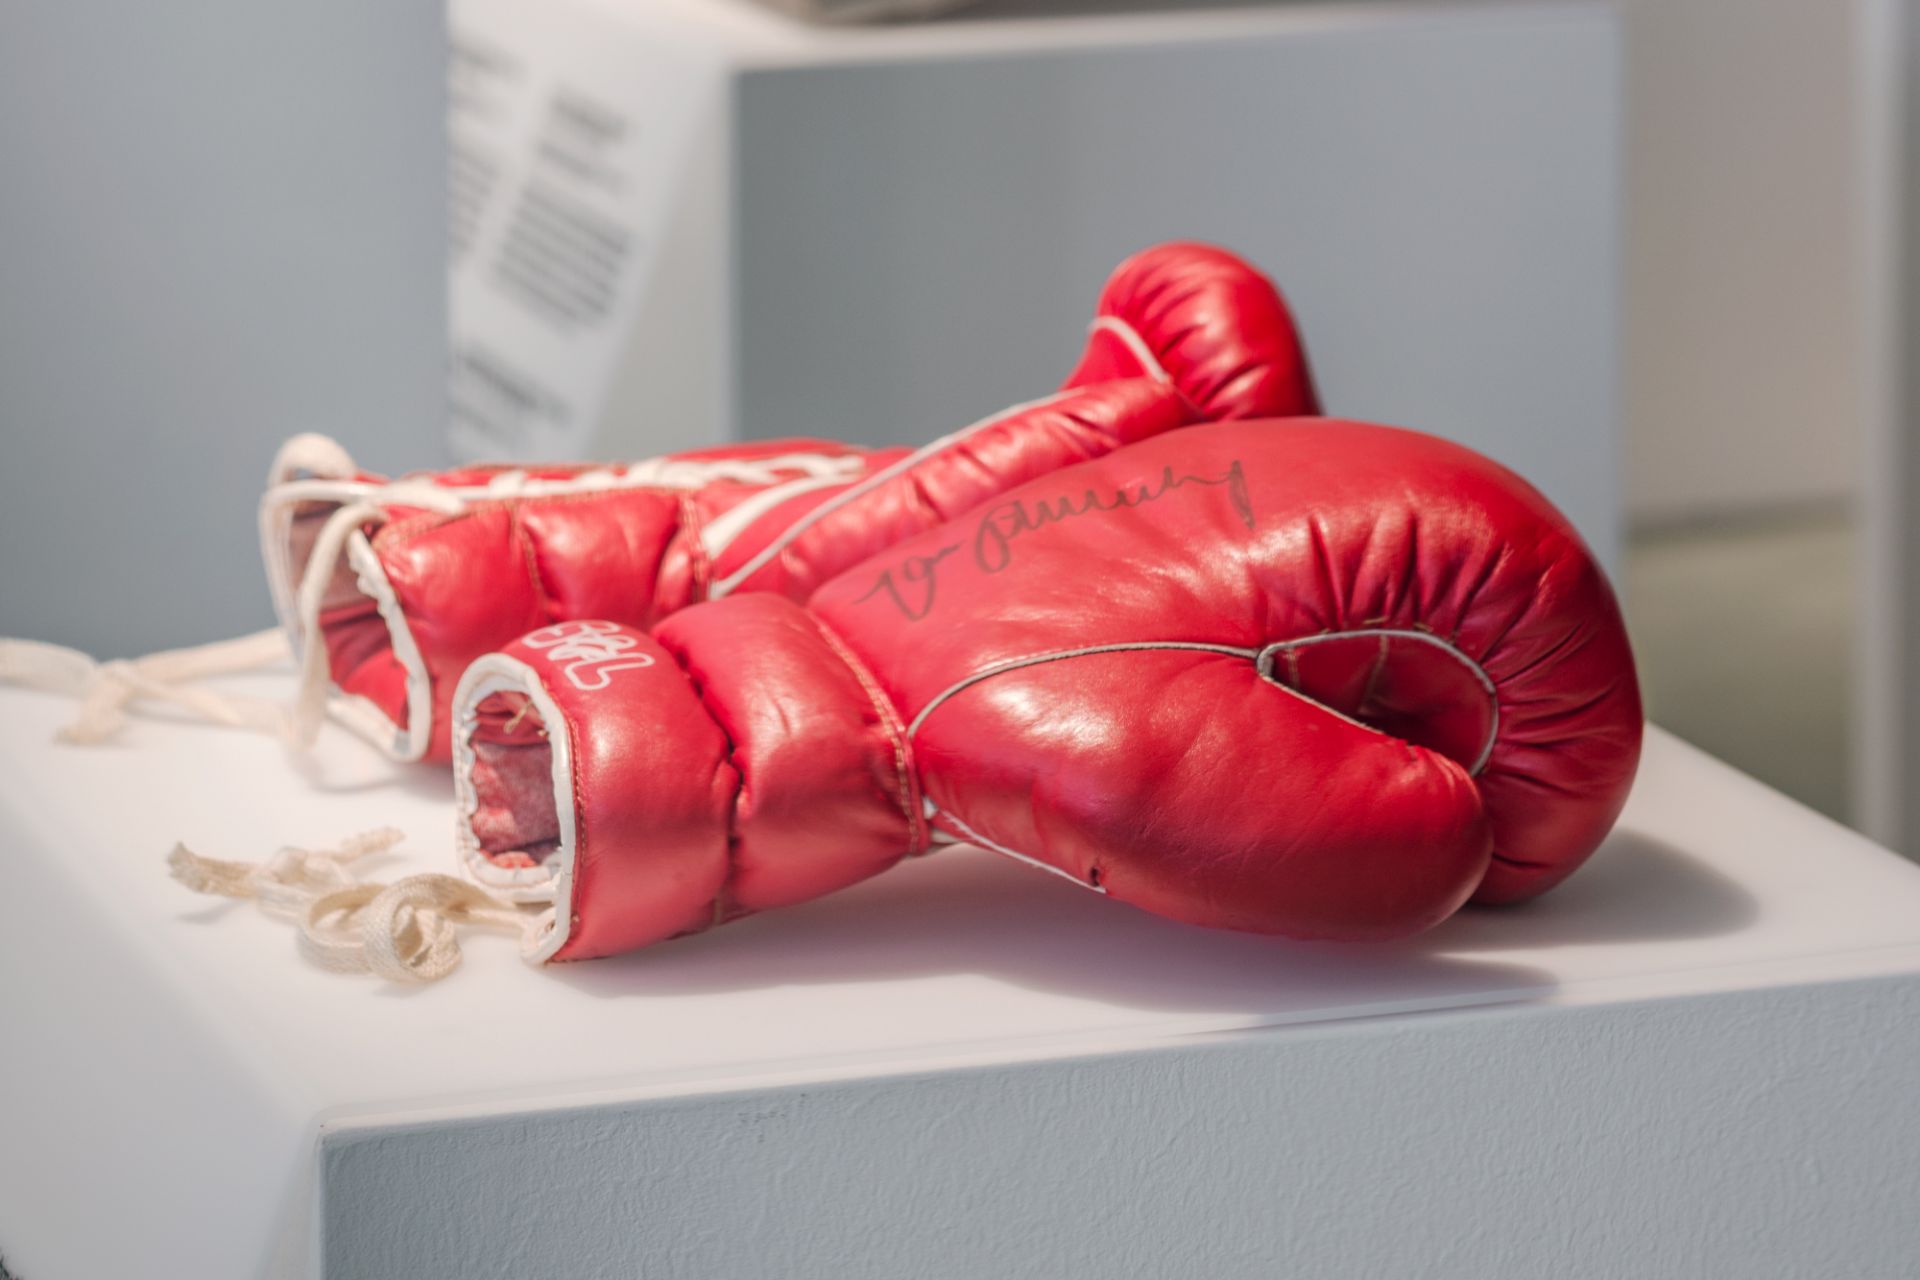 Max Schmeling’s boxing gloves, Germany, approx. 1970